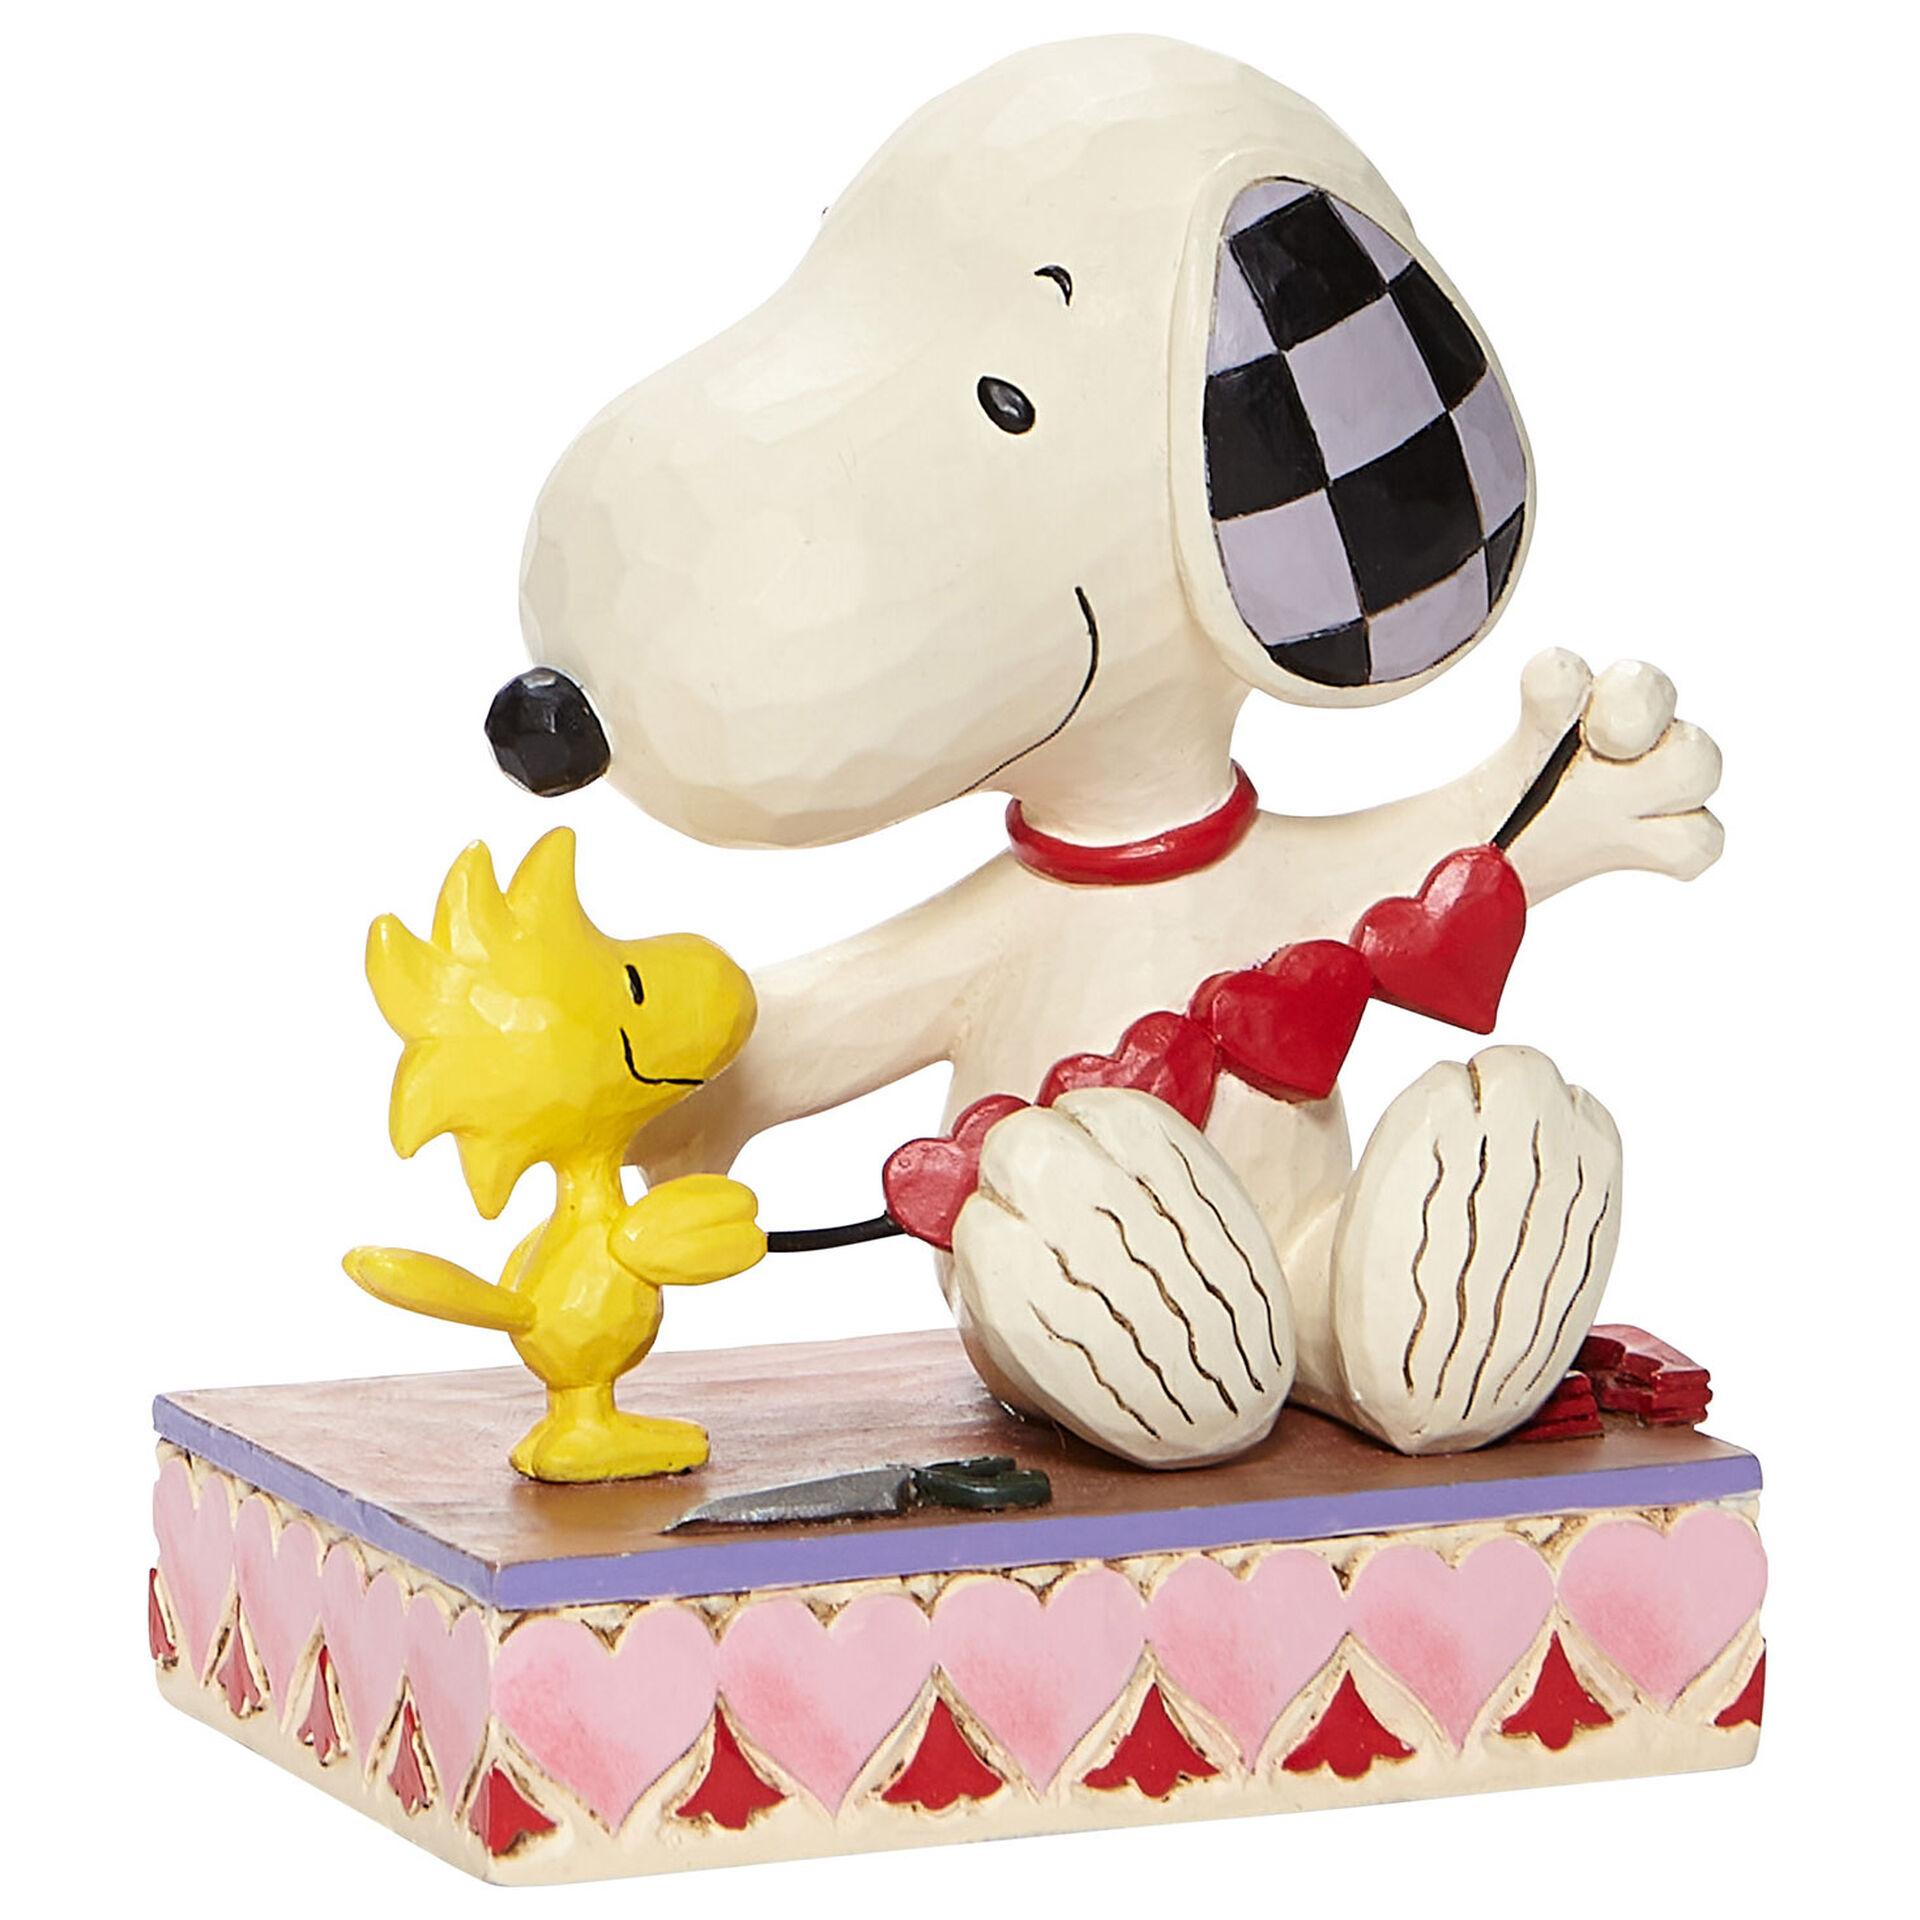 6.75 Multicolor Enesco Peanuts by Jim Shore Snoopy with Woodstock in Nest Figurine 